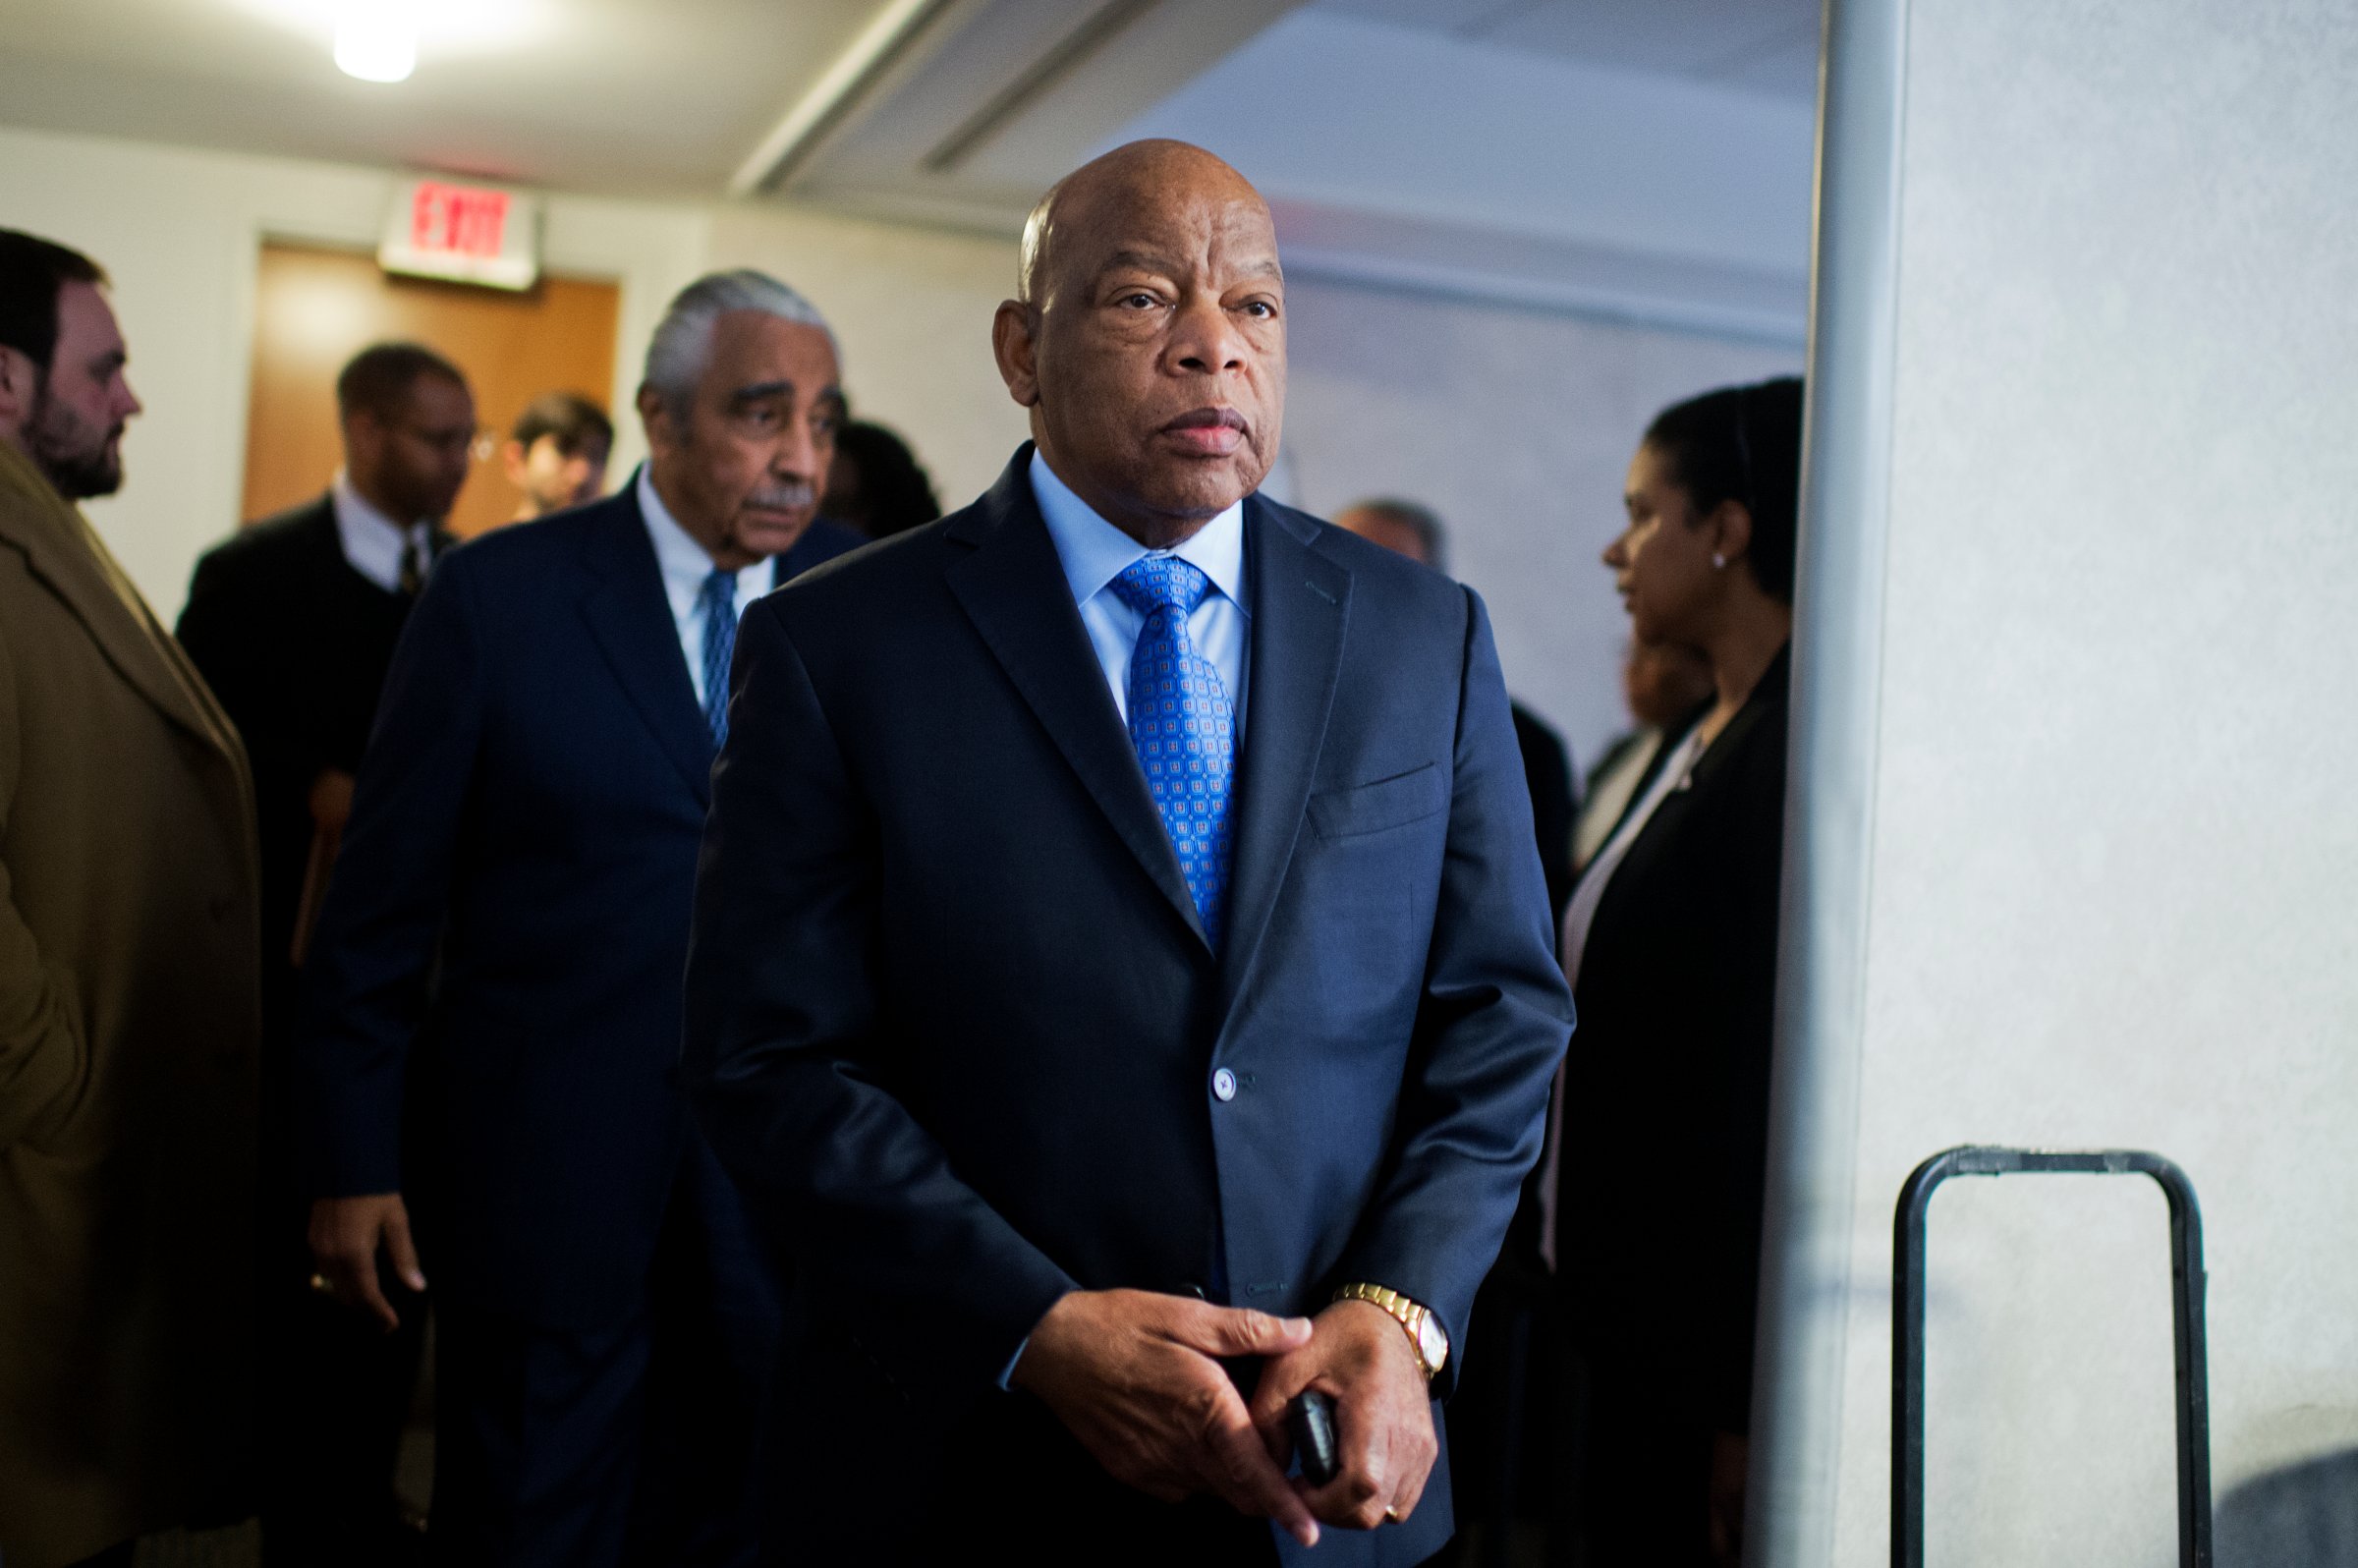 UNITED STATES - FEBRUARY 11: Rep. John Lewis, D-Ga., and Rep. Charlie Rangel, D-N.Y., behind him, arrive for a news conference at the DNC where members of the Congressional Black Caucus PAC endorsed Hillary Clinton for president, February 11, 2016. (Photo By Tom Williams/CQ Roll Call)